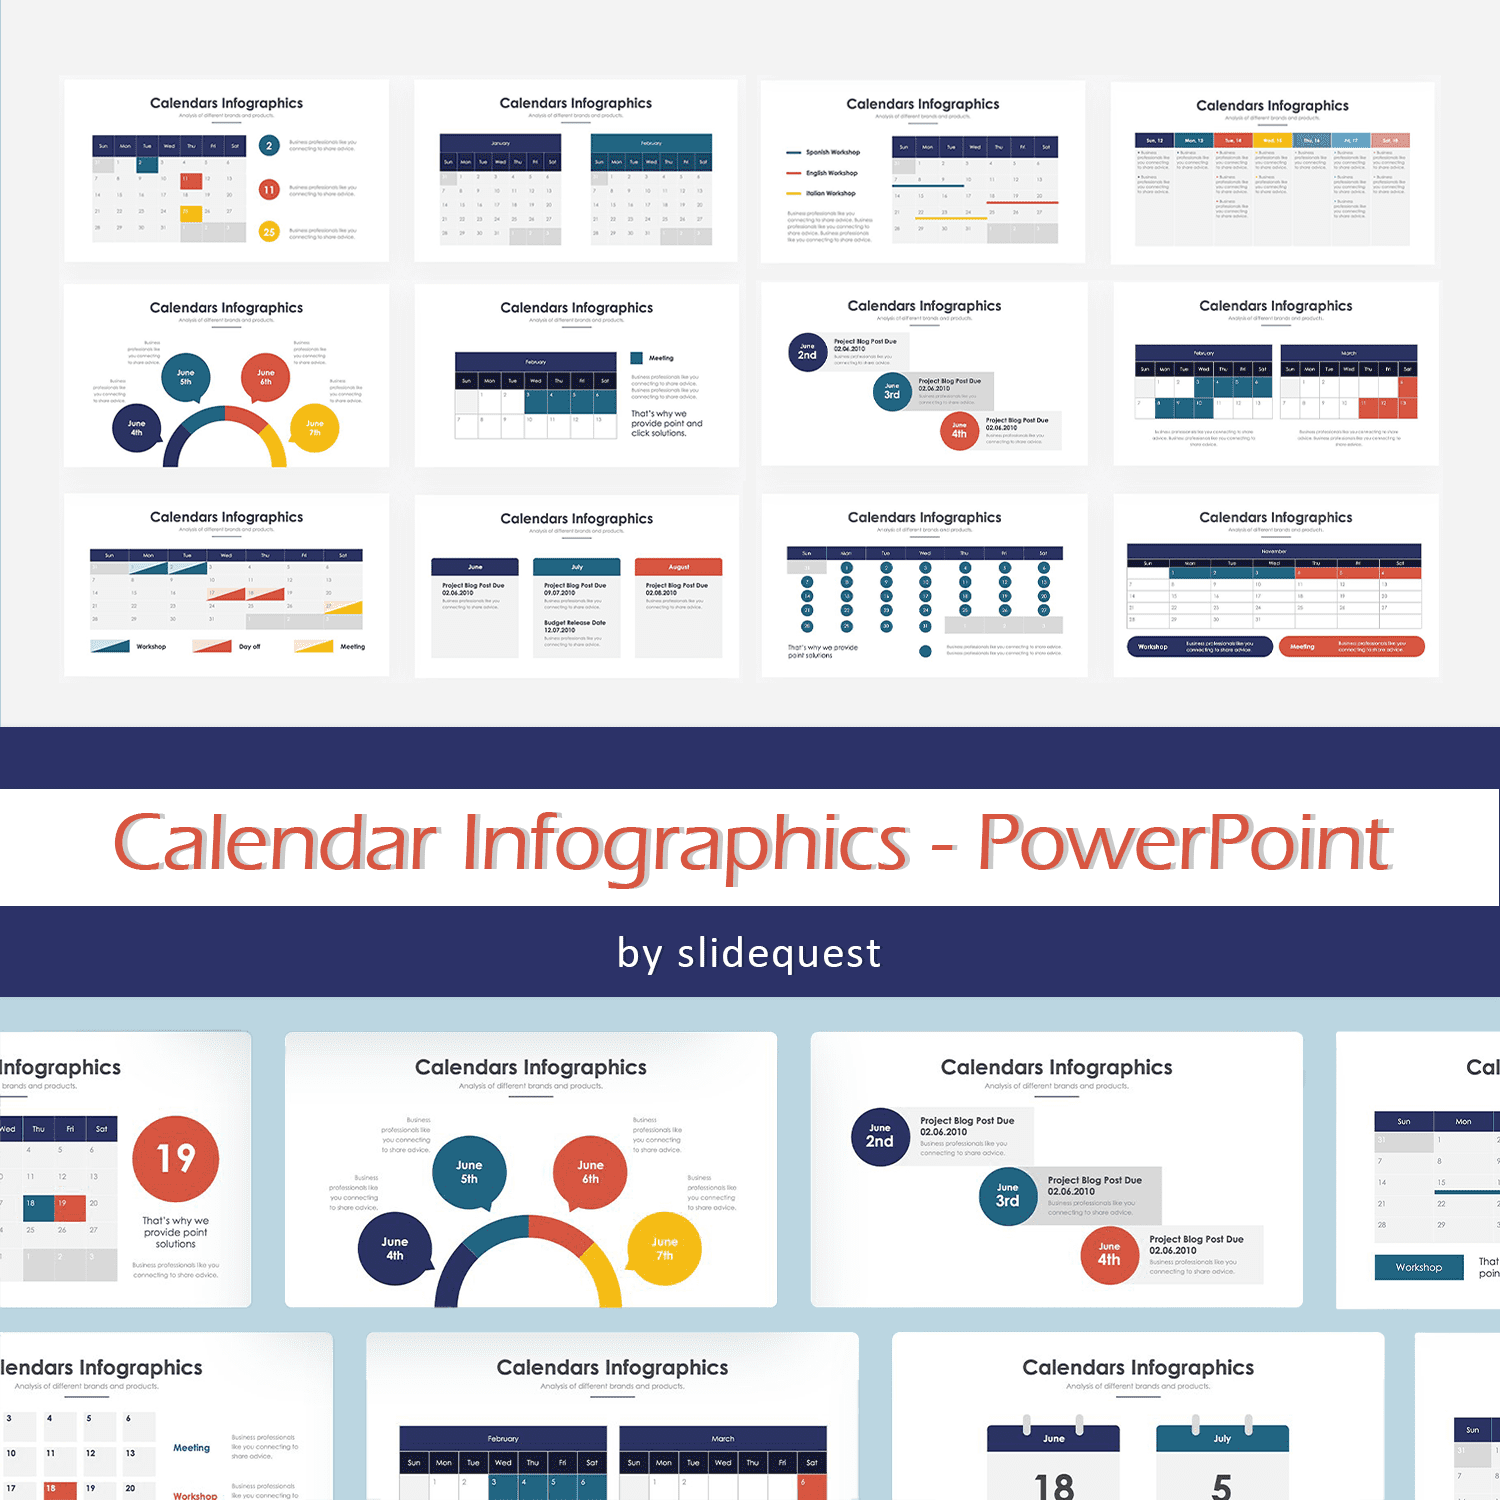 Calendar Infographics - PowerPoint cover image.